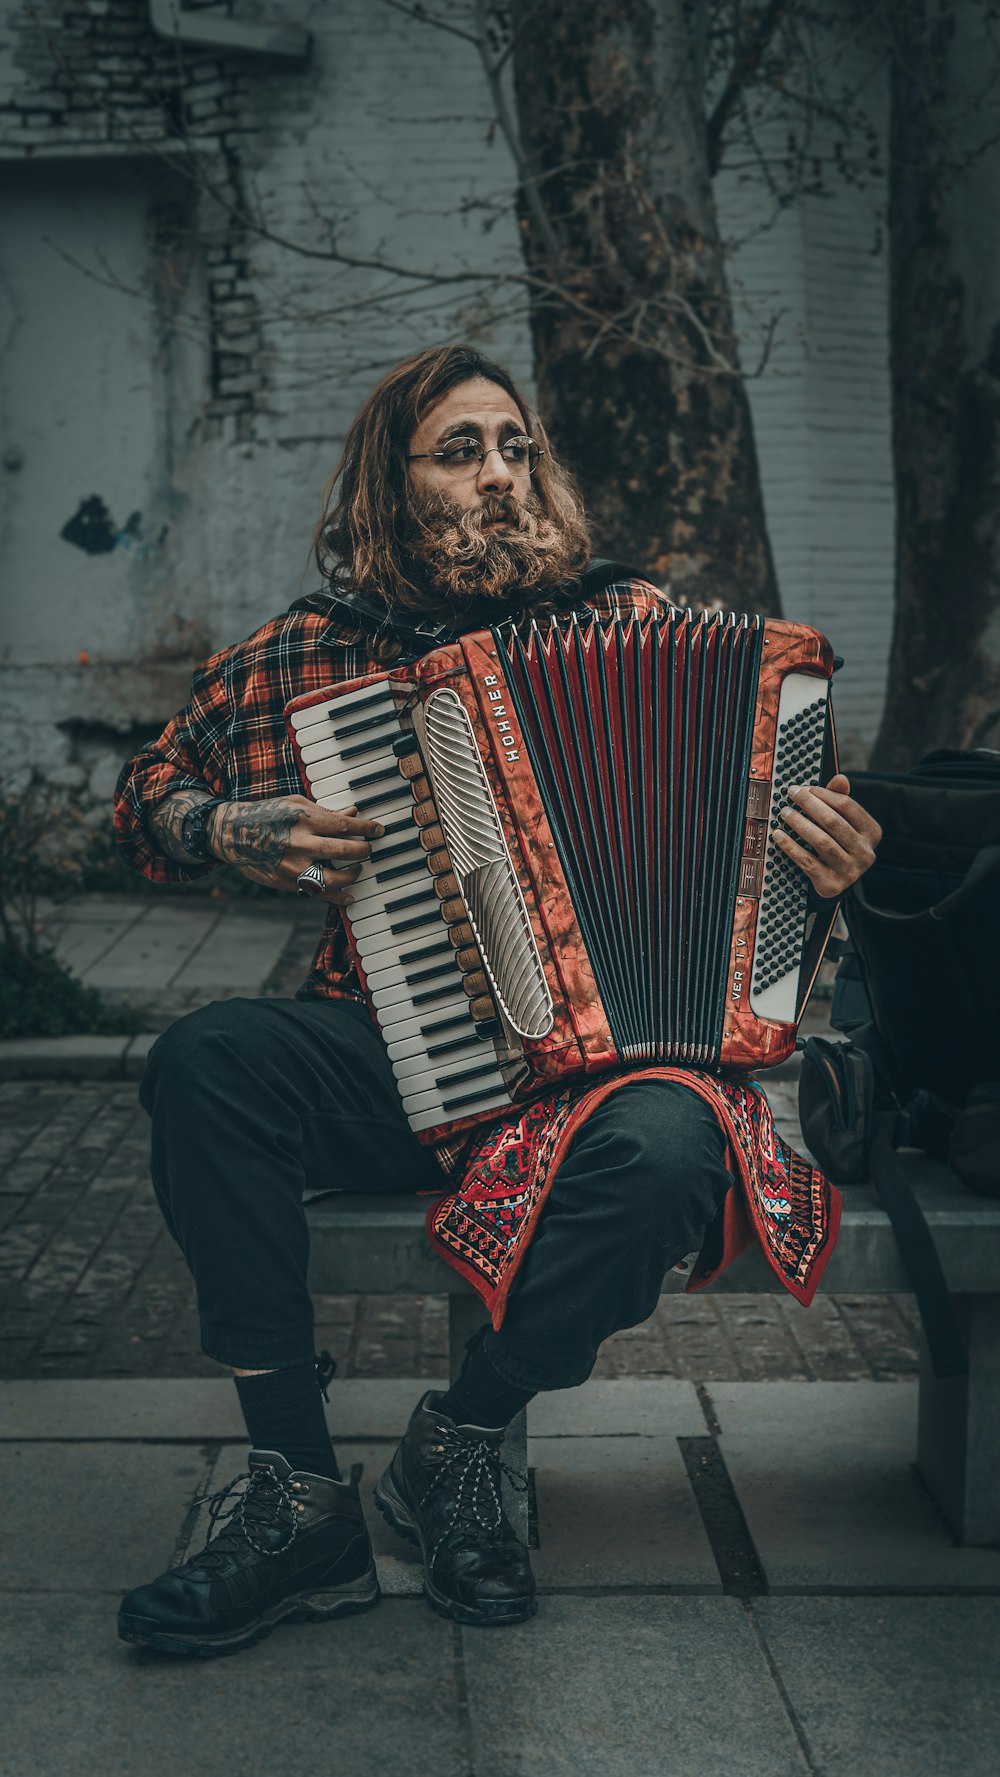 a man sitting on a bench holding an accordion